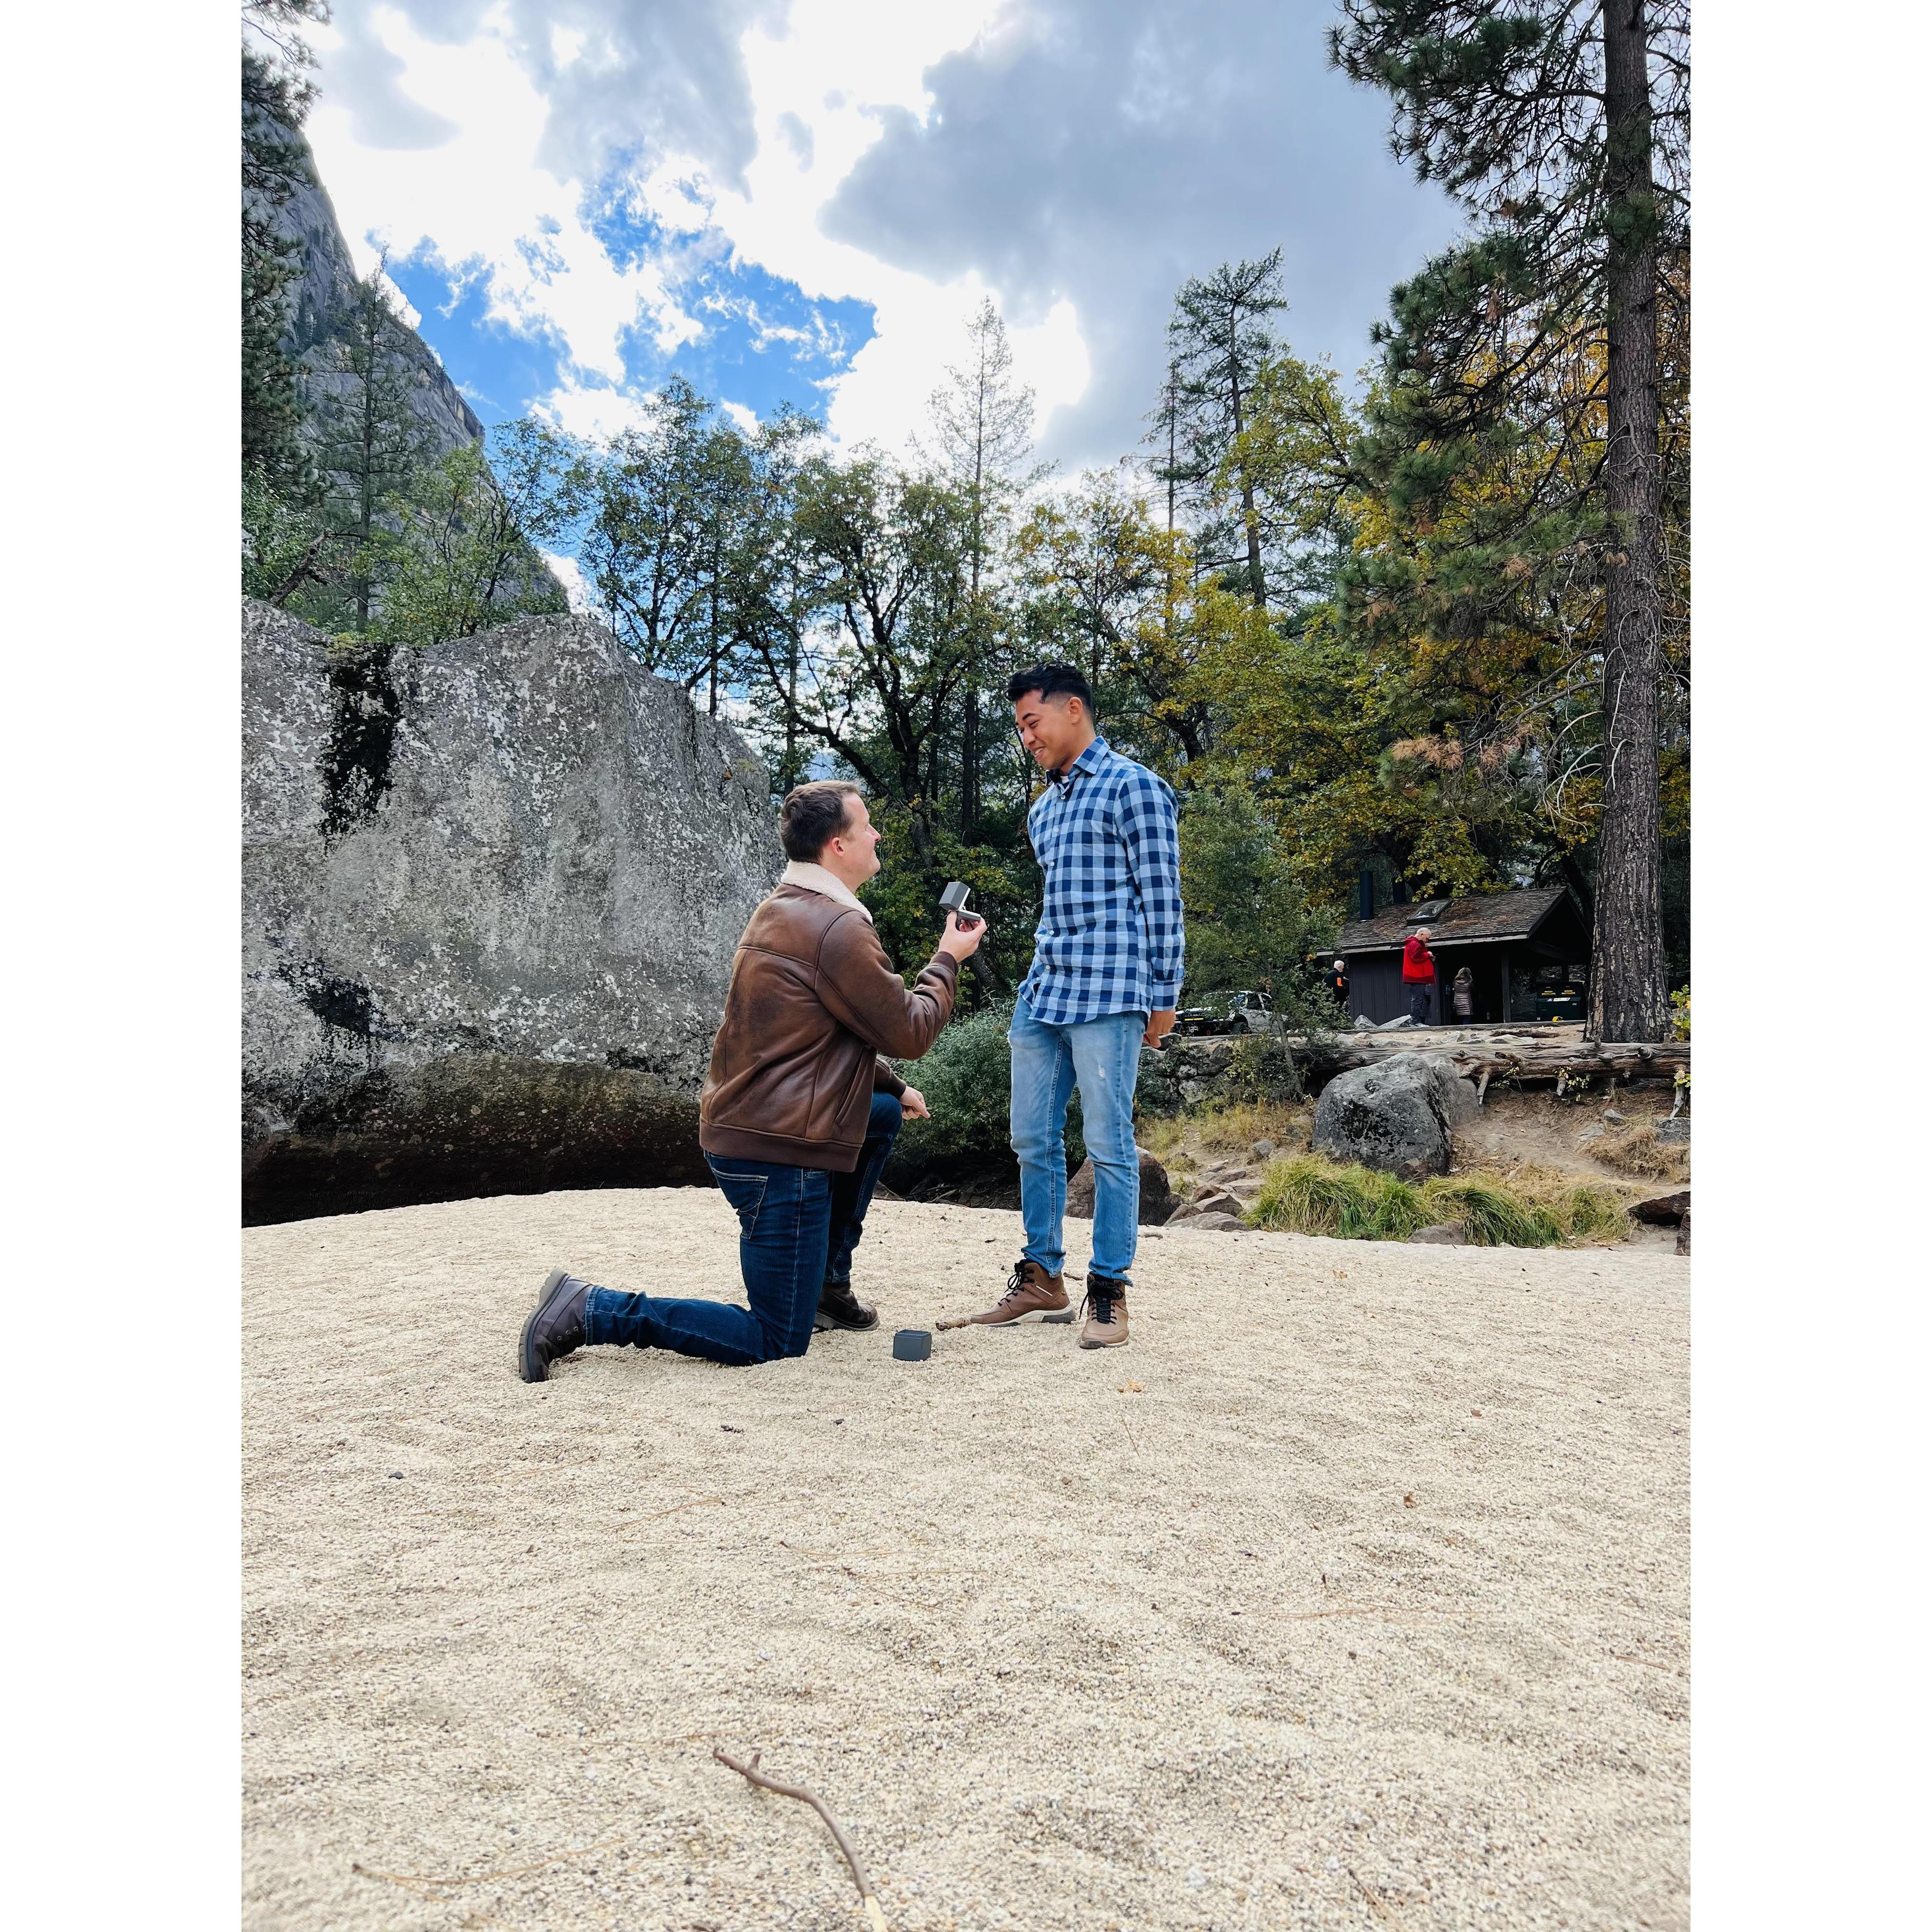 "500 miles" by The Proclaimers had me singing my heart out, but little did I know that my love was about to surprise me. On bended knee, he proposed and I couldn't believe it - a dream come true!